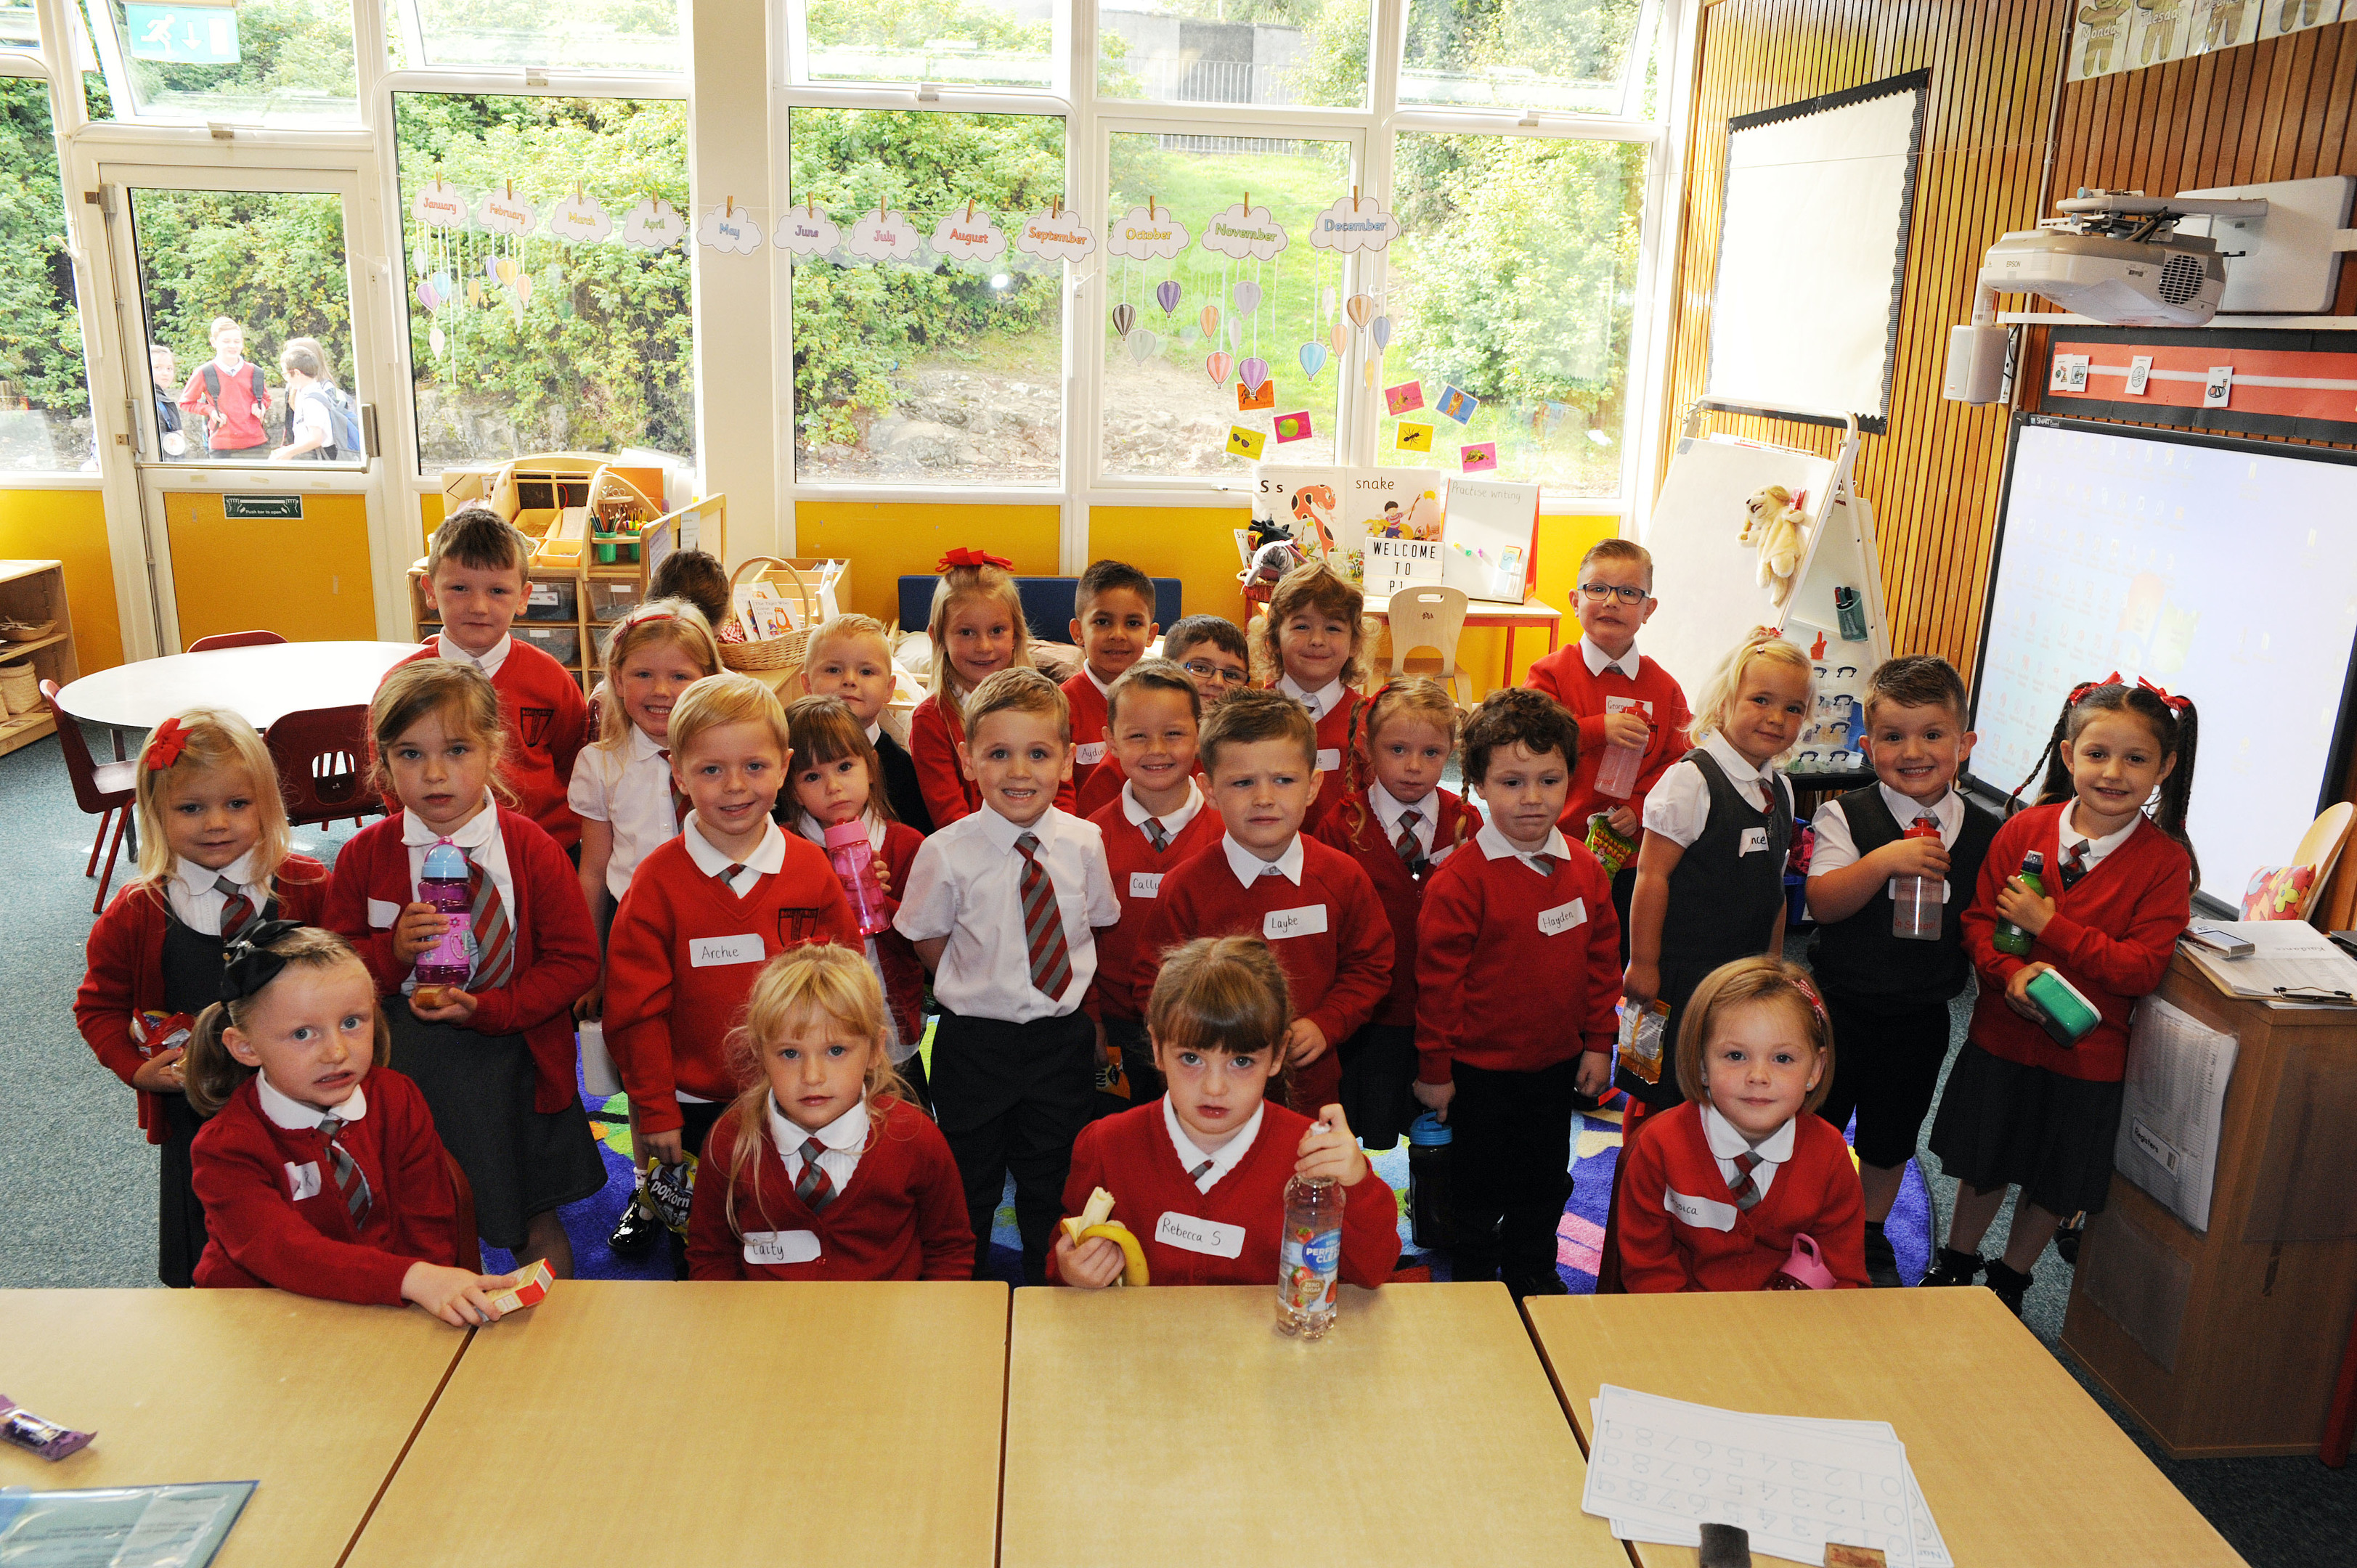 Torbain P1's in class for the first time

(c) David Wardle